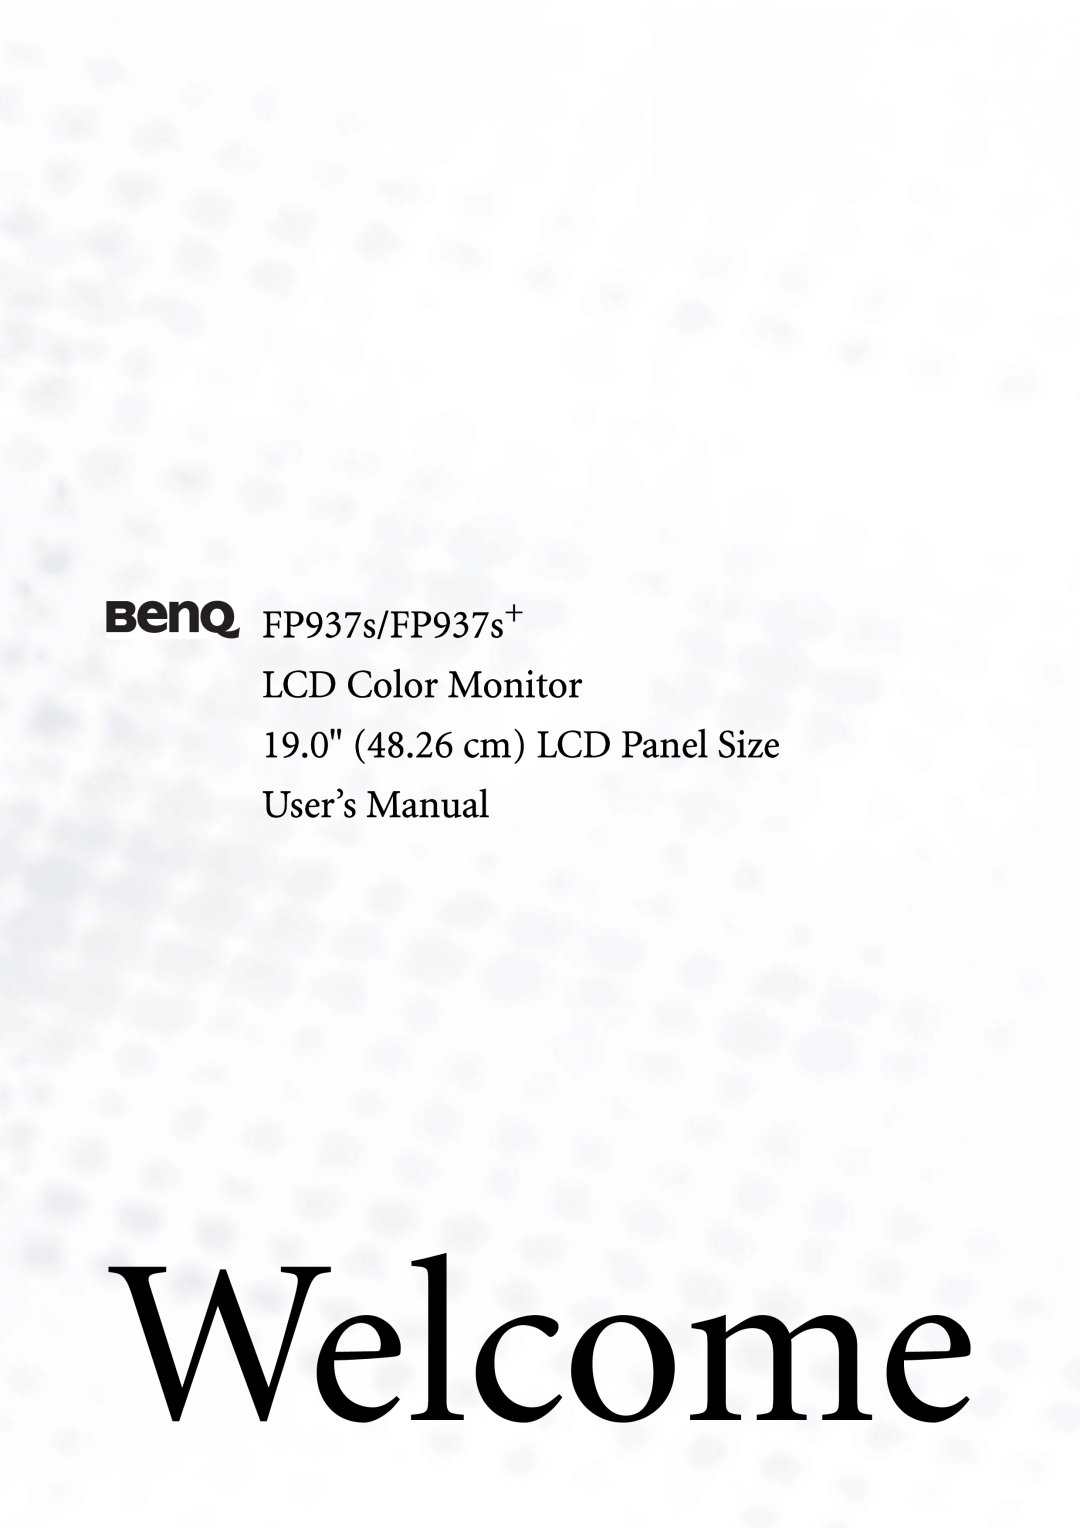 BenQ user manual Welcome, 19.0 48.26 cm LCD Panel Size User’s Manual, FP937s/FP937s+ LCD Color Monitor 